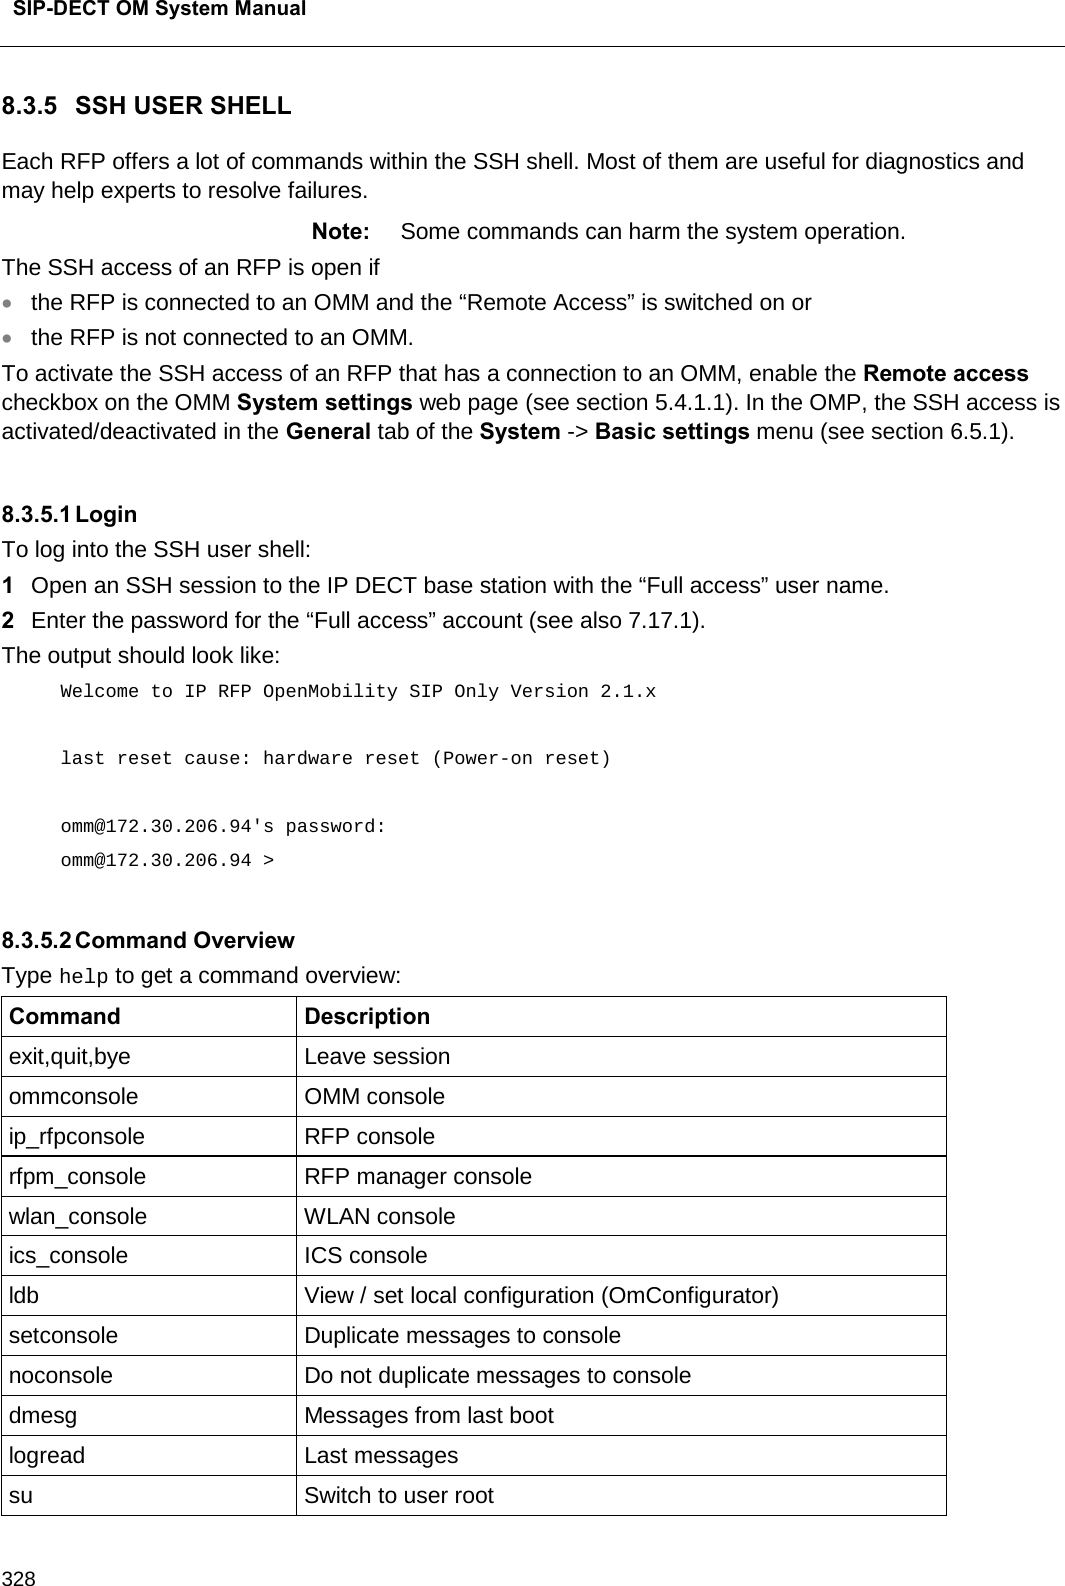  SIP-DECT OM System Manual    328 8.3.5 SSH USER SHELL Each RFP offers a lot of commands within the SSH shell. Most of them are useful for diagnostics and may help experts to resolve failures. Note: Some commands can harm the system operation. The SSH access of an RFP is open if  • the RFP is connected to an OMM and the “Remote Access” is switched on or  • the RFP is not connected to an OMM. To activate the SSH access of an RFP that has a connection to an OMM, enable the Remote access checkbox on the OMM System settings web page (see section 5.4.1.1). In the OMP, the SSH access is activated/deactivated in the General tab of the System -&gt; Basic settings menu (see section 6.5.1).  8.3.5.1 Login To log into the SSH user shell: 1  Open an SSH session to the IP DECT base station with the “Full access” user name. 2  Enter the password for the “Full access” account (see also 7.17.1).  The output should look like:  Welcome to IP RFP OpenMobility SIP Only Version 2.1.x  last reset cause: hardware reset (Power-on reset)  omm@172.30.206.94&apos;s password: omm@172.30.206.94 &gt;  8.3.5.2 Command Overview Type help to get a command overview: Command Description exit,quit,bye Leave session ommconsole OMM console ip_rfpconsole RFP console rfpm_console RFP manager console wlan_console WLAN console ics_console ICS console ldb View / set local configuration (OmConfigurator) setconsole Duplicate messages to console noconsole Do not duplicate messages to console dmesg Messages from last boot logread Last messages su  Switch to user root 